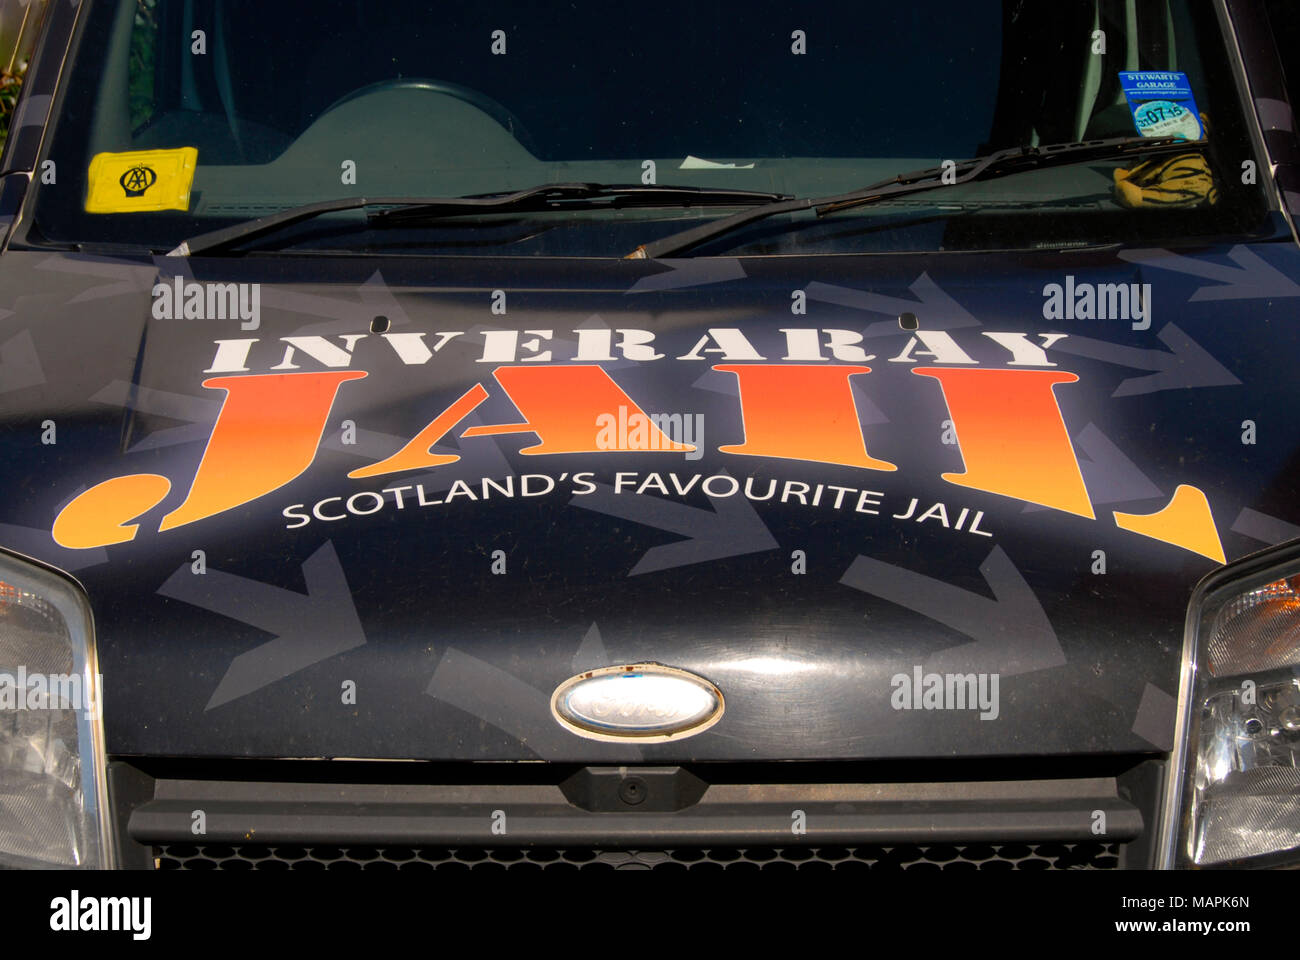 Vehicle with advertising for Inveraray jail, Scotland, on bonnet Stock Photo